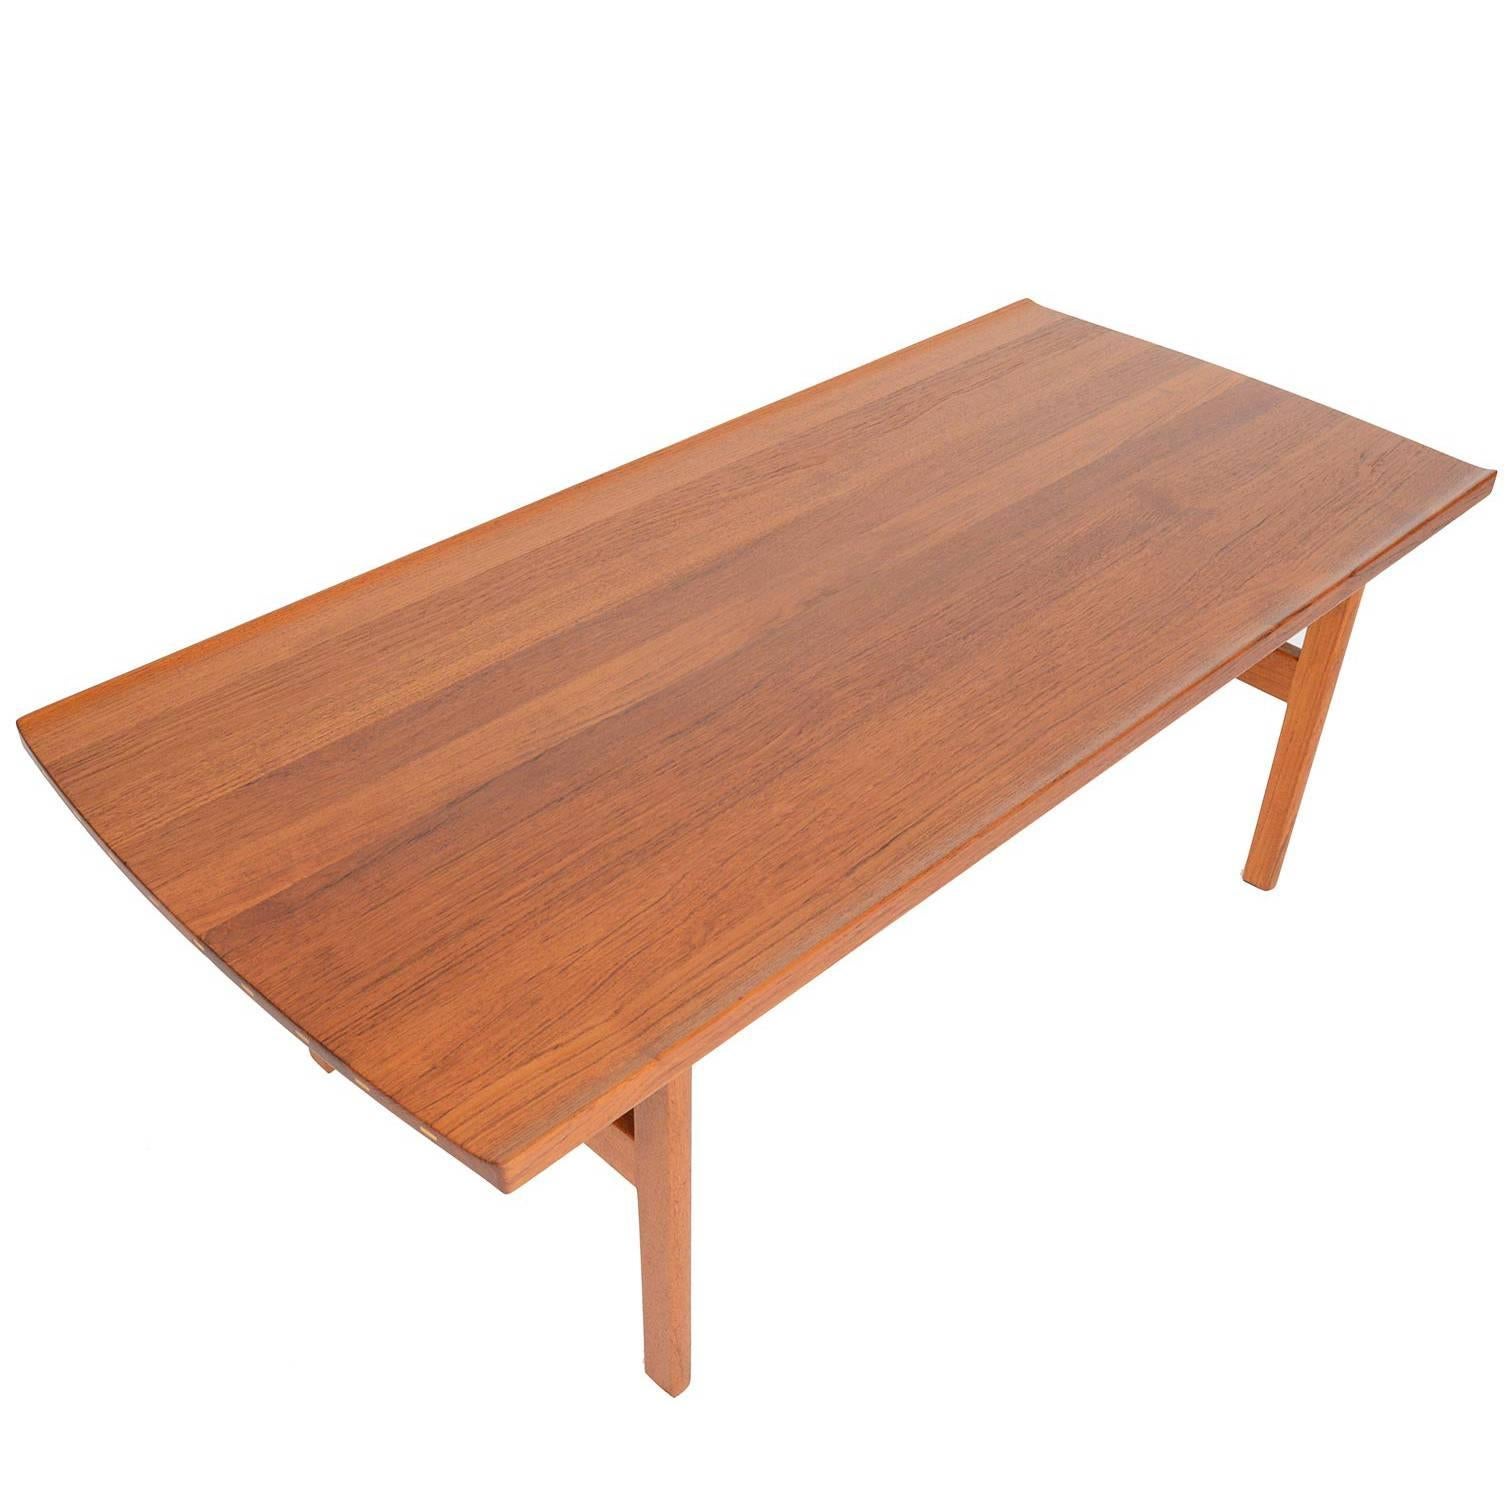 Refinished Solid Teak Coffee Table by Tove and Edvard Kindt - Larsen